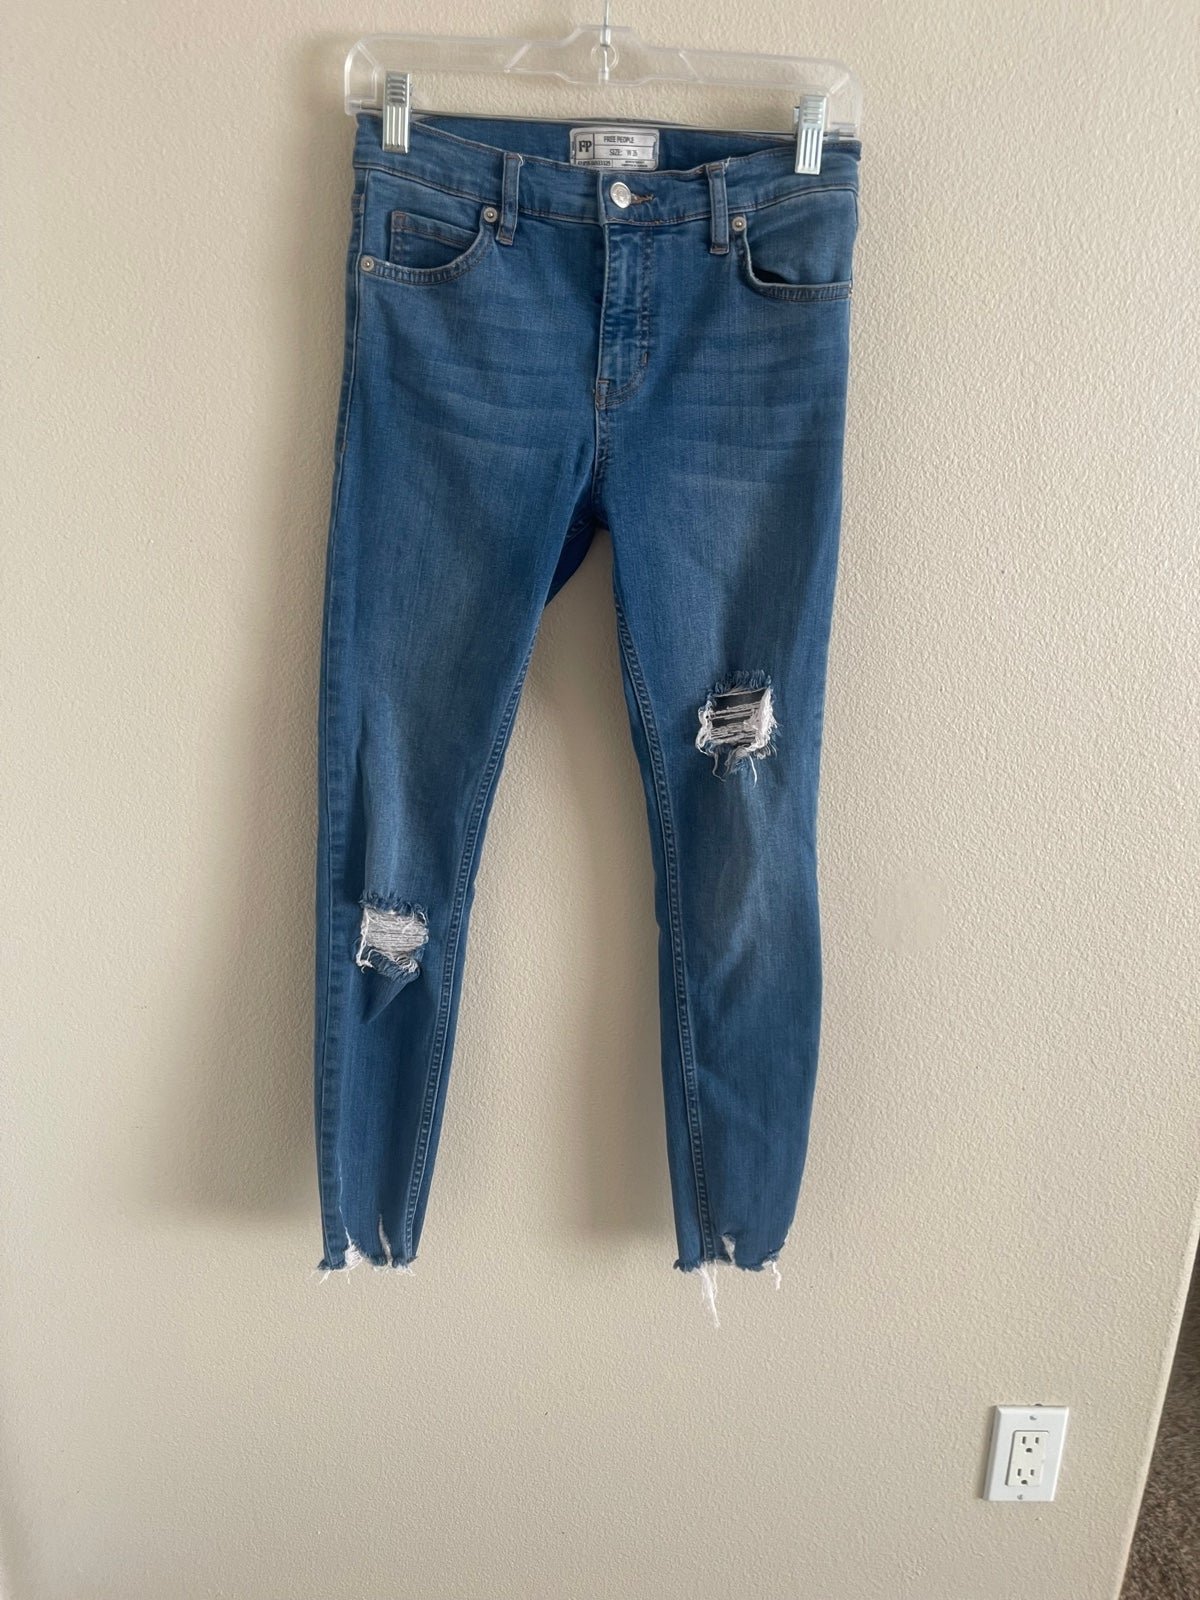 Wholesale price Free People Womens Medium Wash Distressed Skinny Jeans size 26 H8kF1T38X New Style